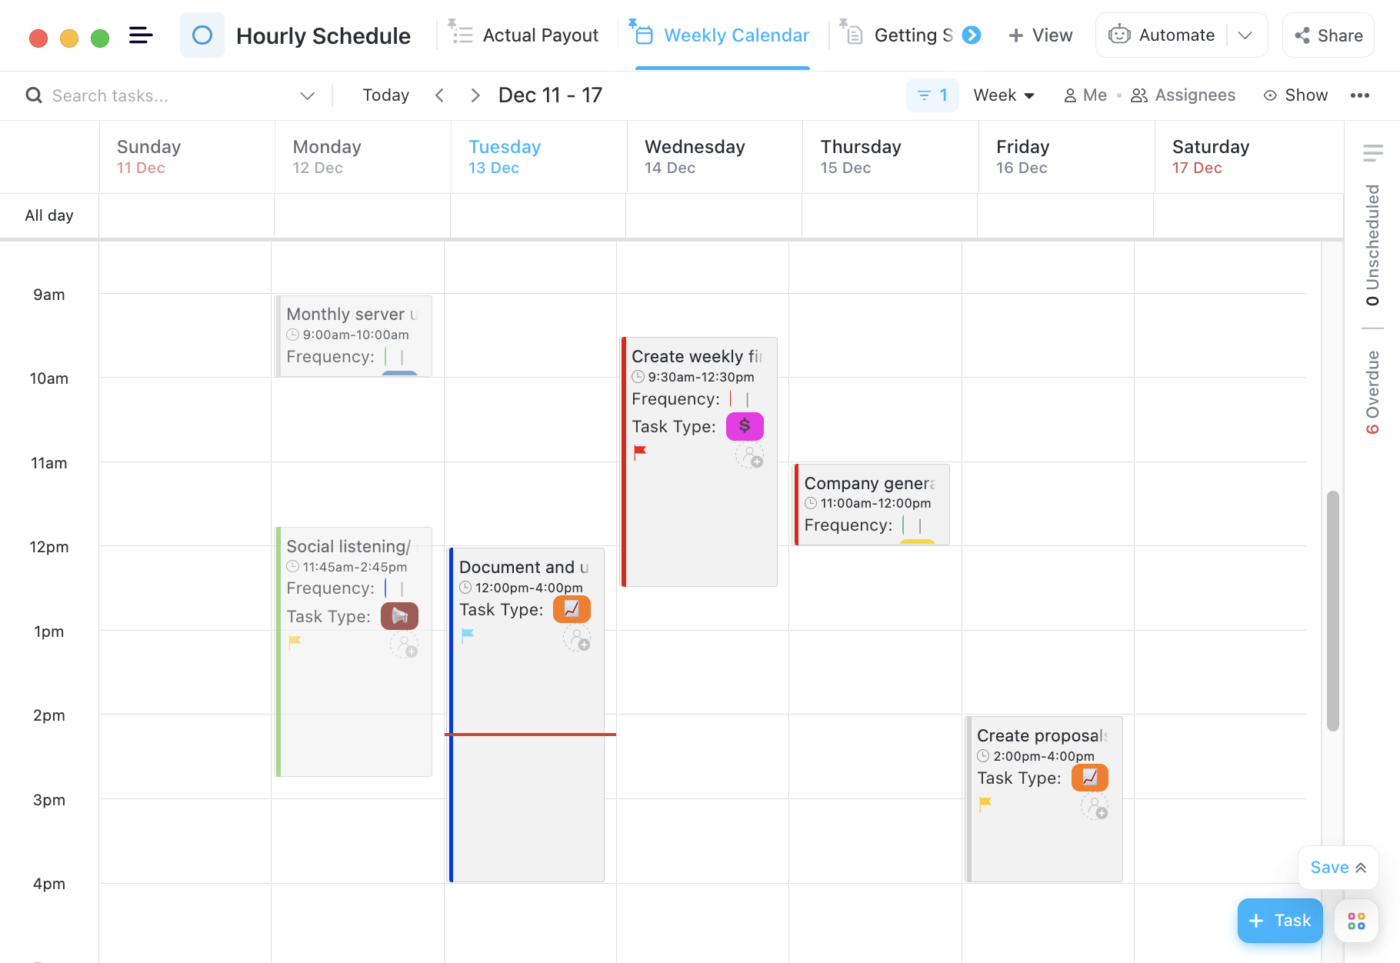 Daily report templates: ClickUp Hourly Schedule Template